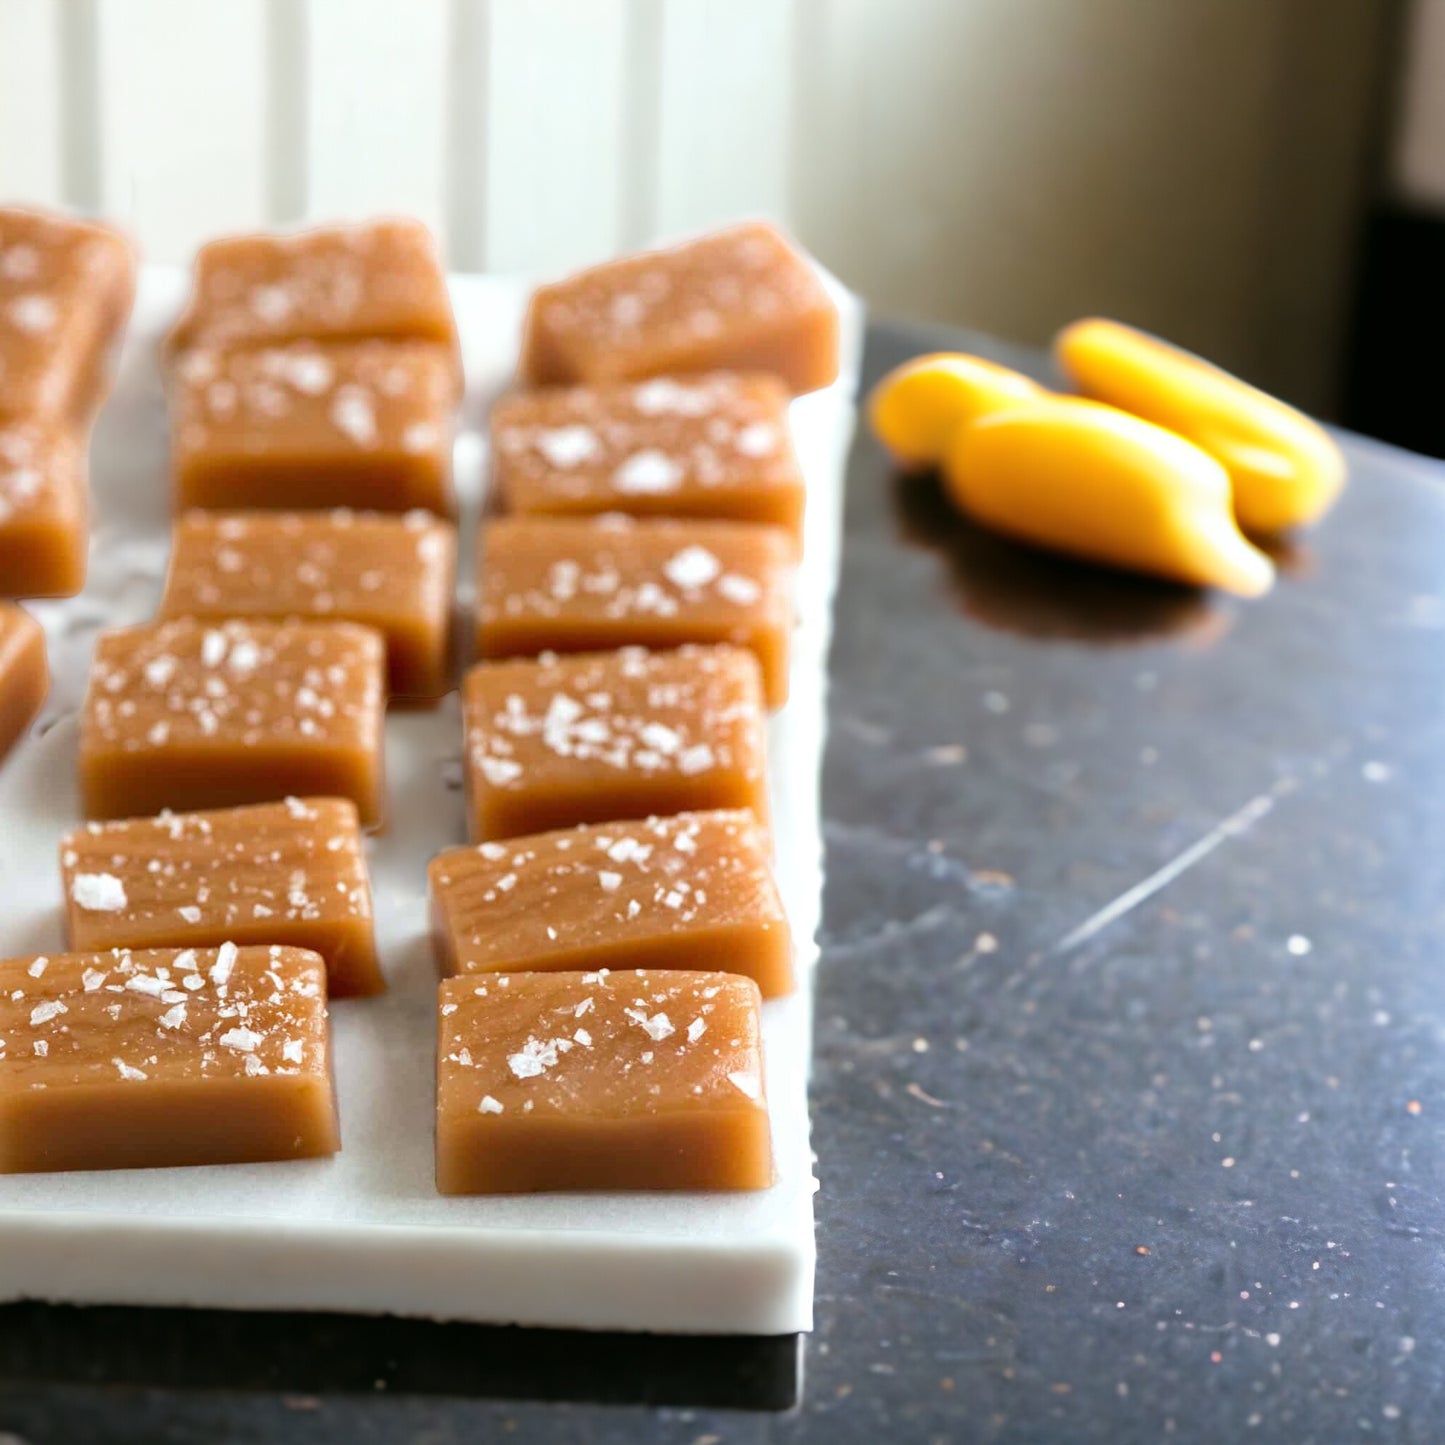 A selection of Salted Caramel pieces arranged on a serving tray